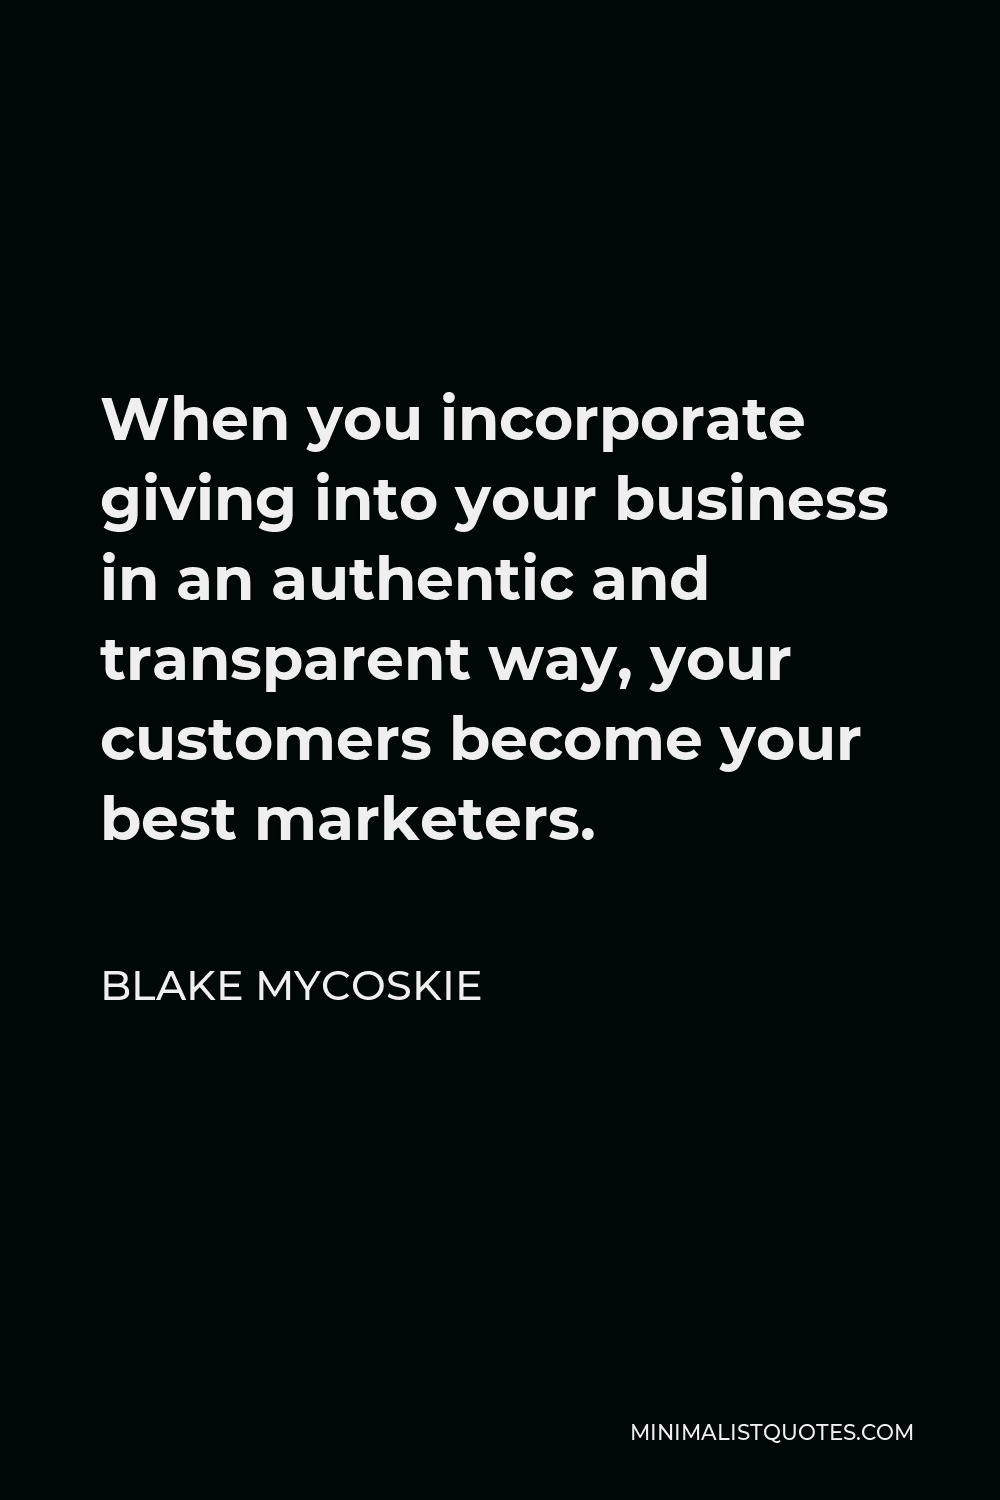 Blake Mycoskie Quote - When you incorporate giving into your business in an authentic and transparent way, your customers become your best marketers.